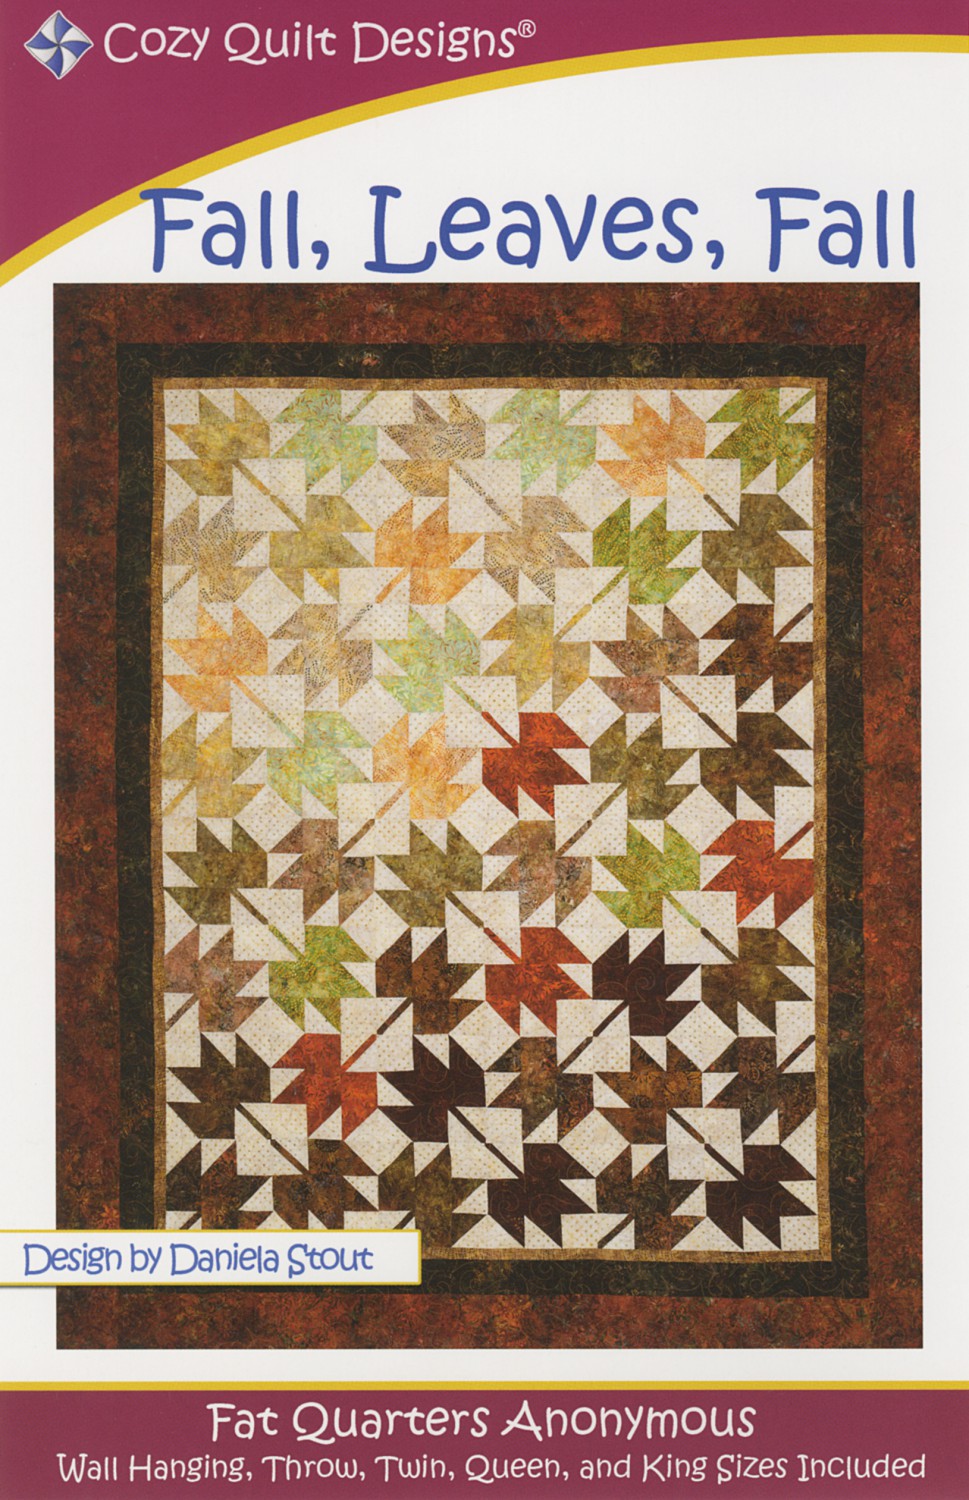 Quilt Designs Fall, Leaves, Fall Quilt Pattern